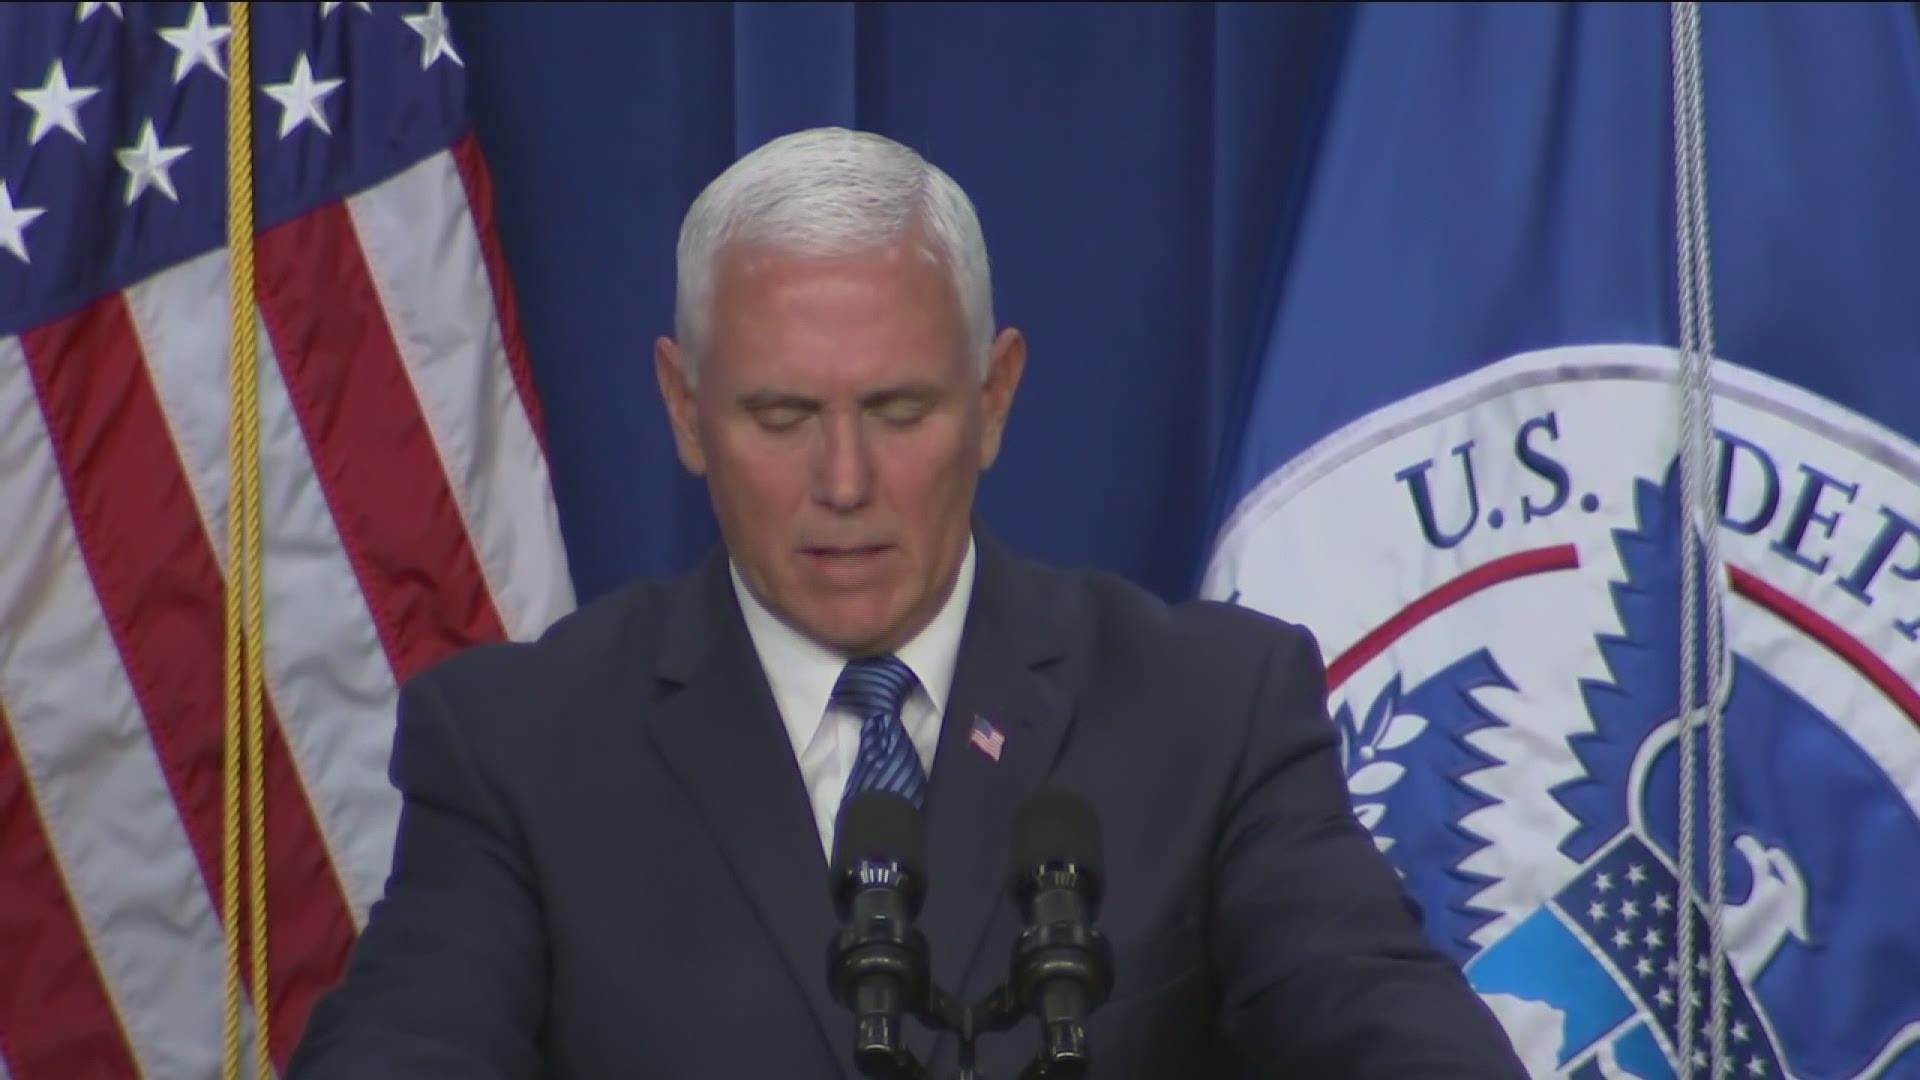 Vice President Mike Pence is defending federal immigration authorities charged with detaining and deporting migrants entering the country illegally. (AP)